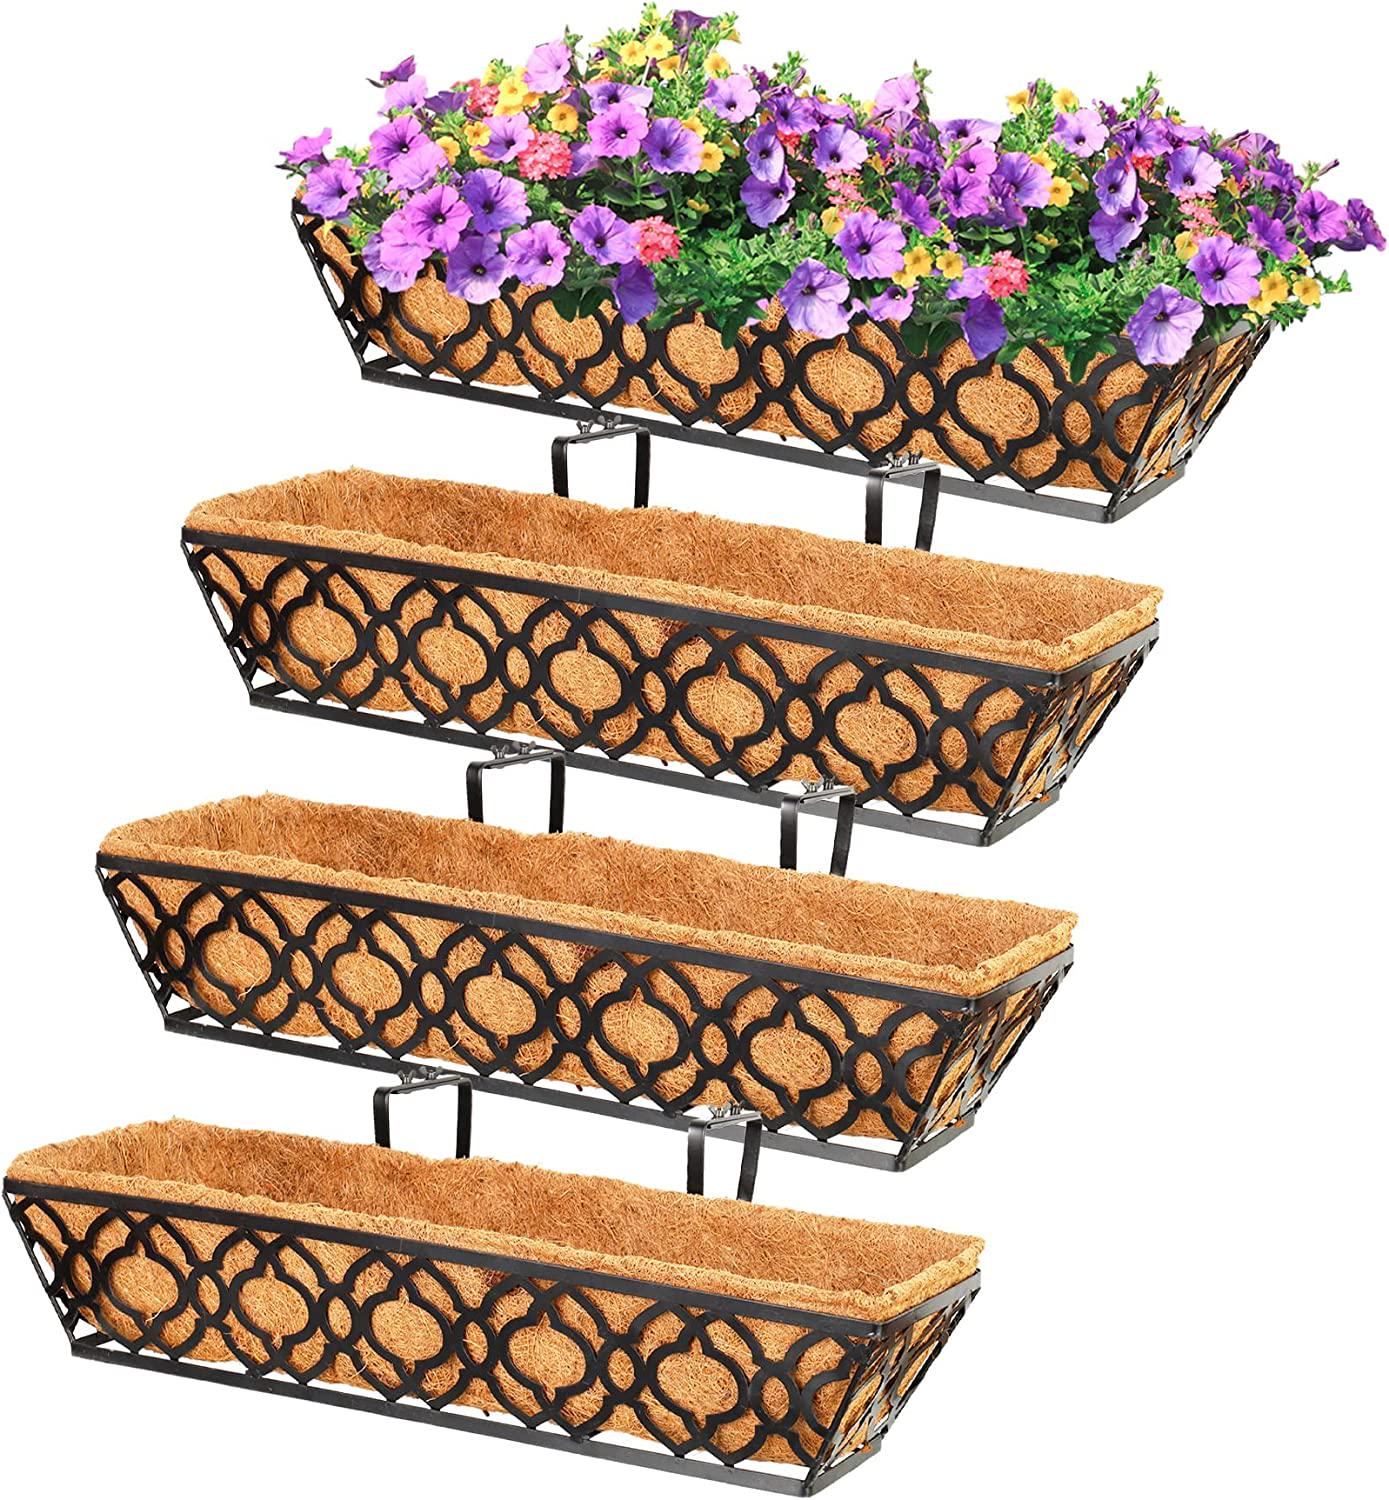 Y&M 24inch Window Planter Box 4Pcs Iron Window Deck Railing Planter with Coco Liner, Metal Horse Troughs Fence Planter for Outdoor Balcony Rail Fence Porch Patio-